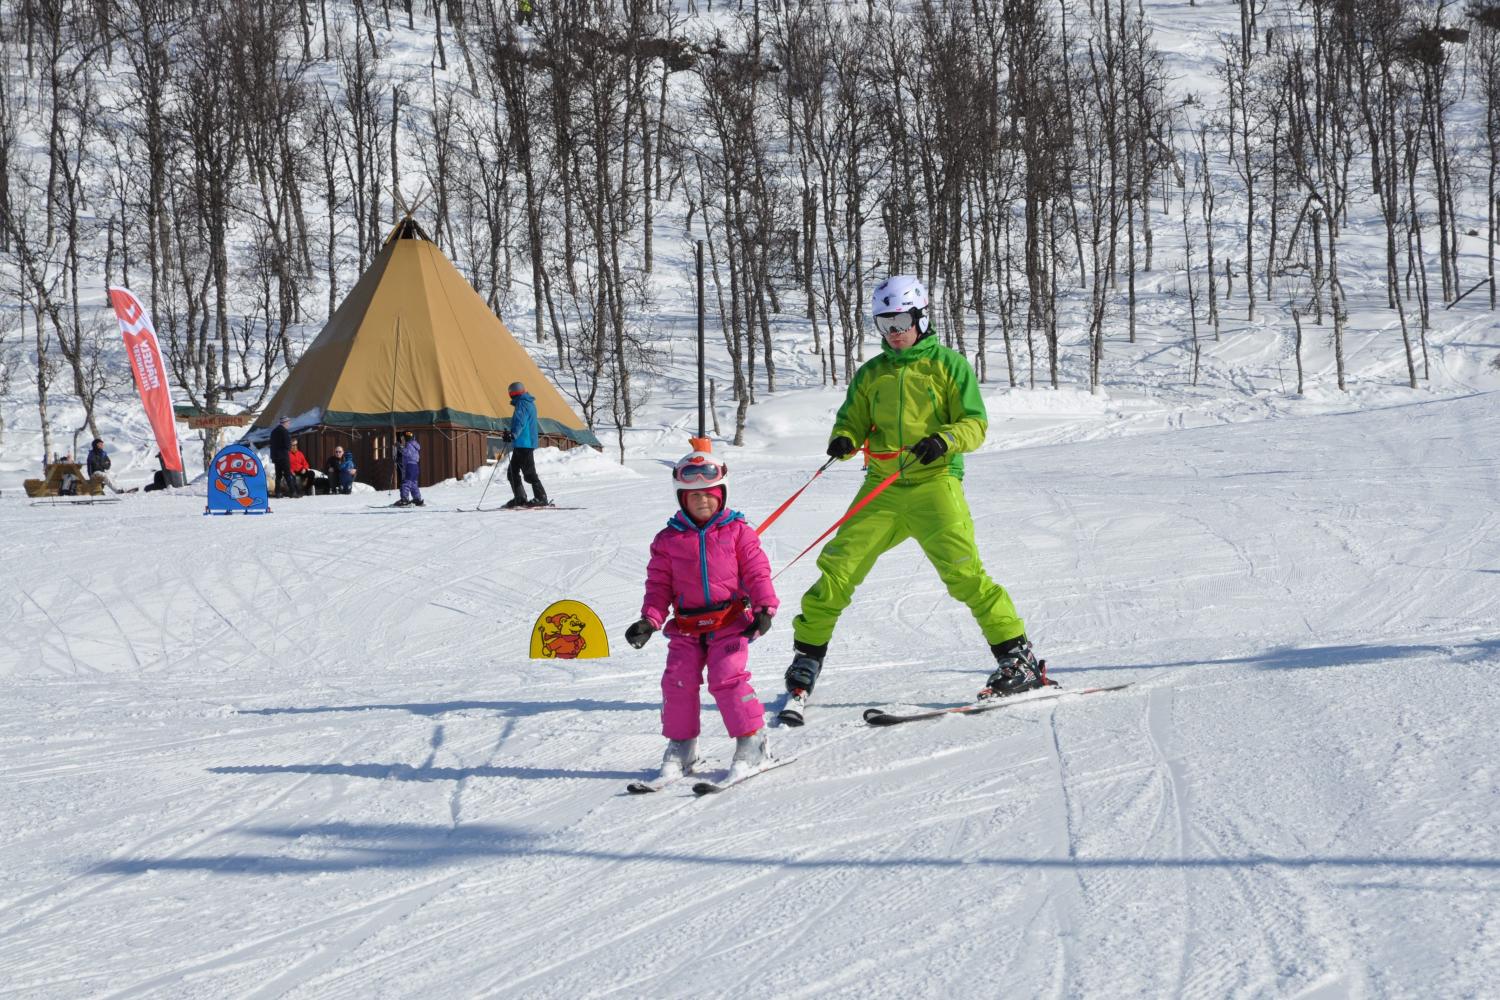 Downhill Skiing at Målselv Mountain Village